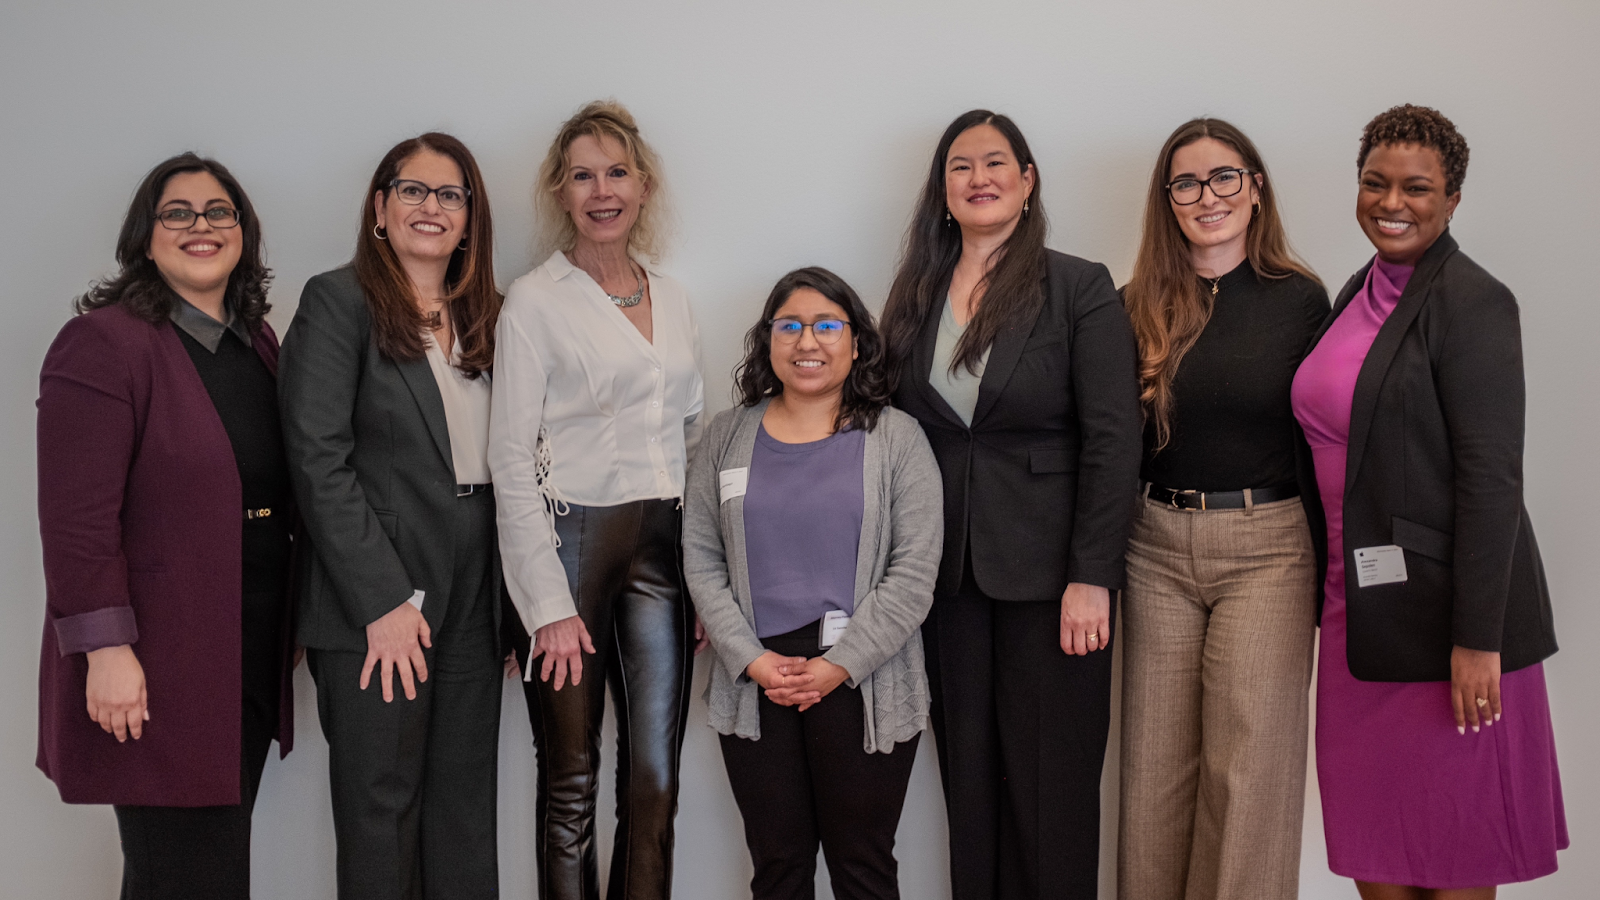 A photograph of the Get Into the Legal Loop 2024 Panelists and Queen’s Bench Mentorship Committee Co-Chairs; from left to right, Linda Anderson, Mentorship Committee Co-Chair; Michèle Bissada; Elizabeth Miles Waring, Liz Sanchez Santiago; Administrative Law Judge Dorothy Chou Proudfoot; Kristen Rovai; and Alexandra Sepolen, Secretary and Mentorship Committee Co-Chair.